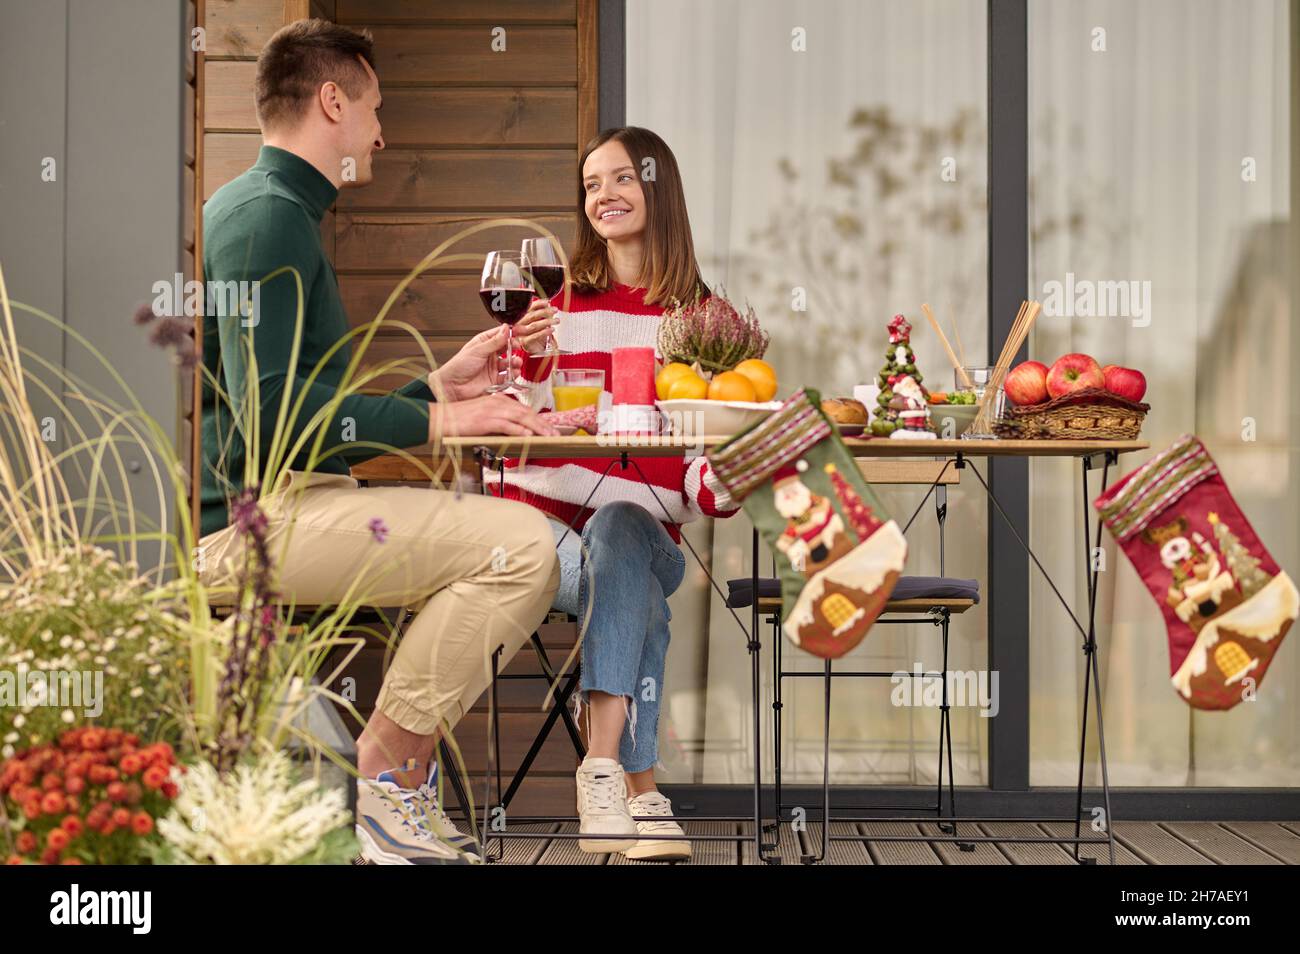 Two people sitting at the table and having a celebration Stock Photo